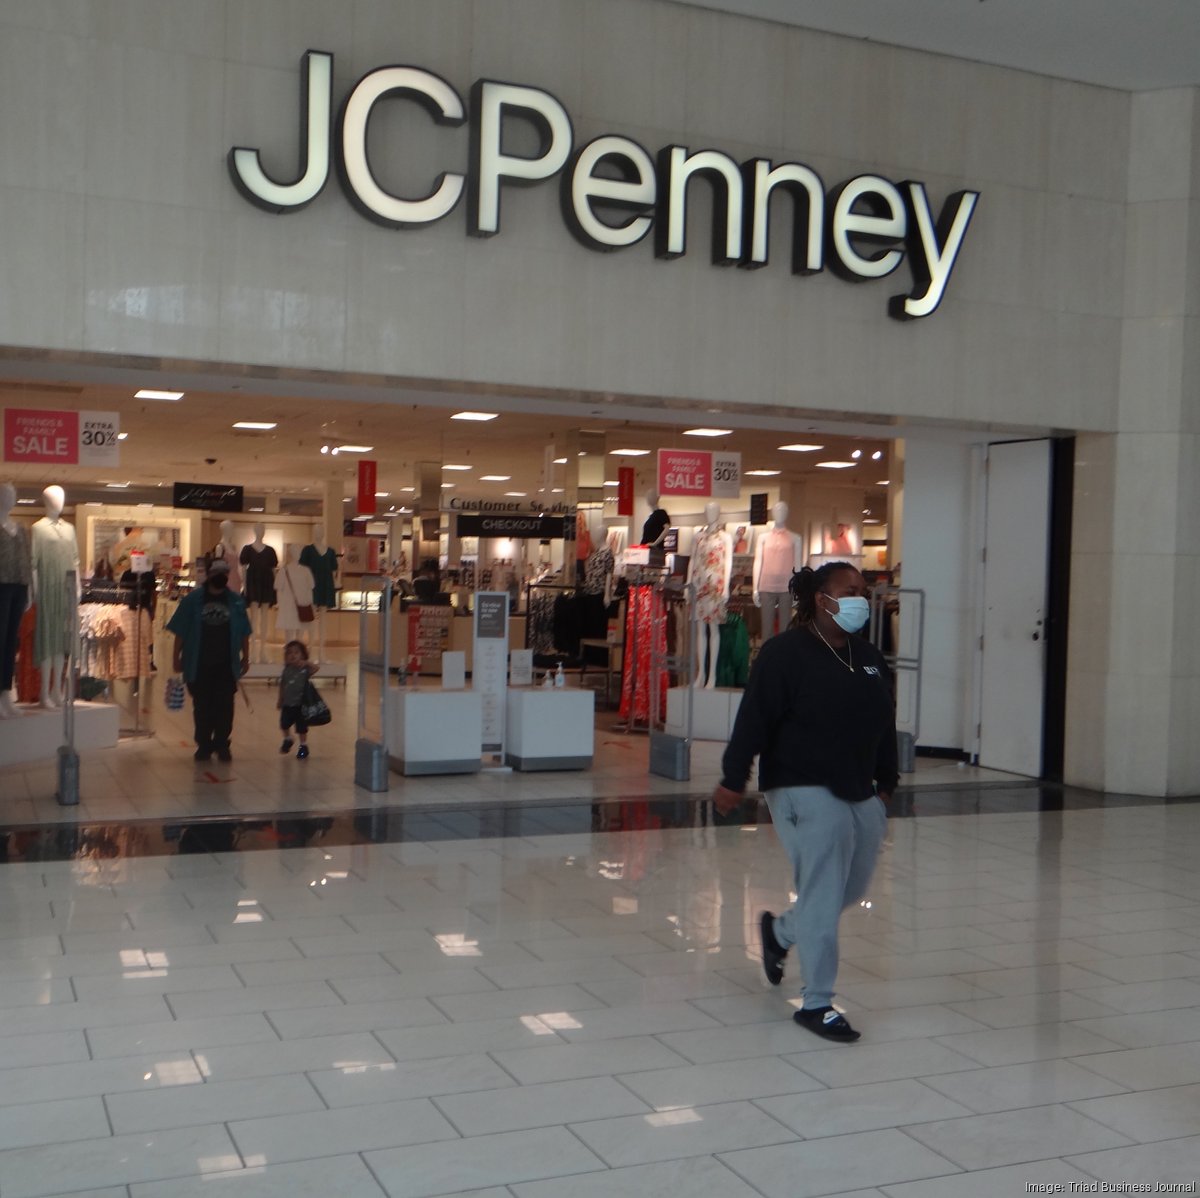 JC Penney store closing clearance sales begin: What to know